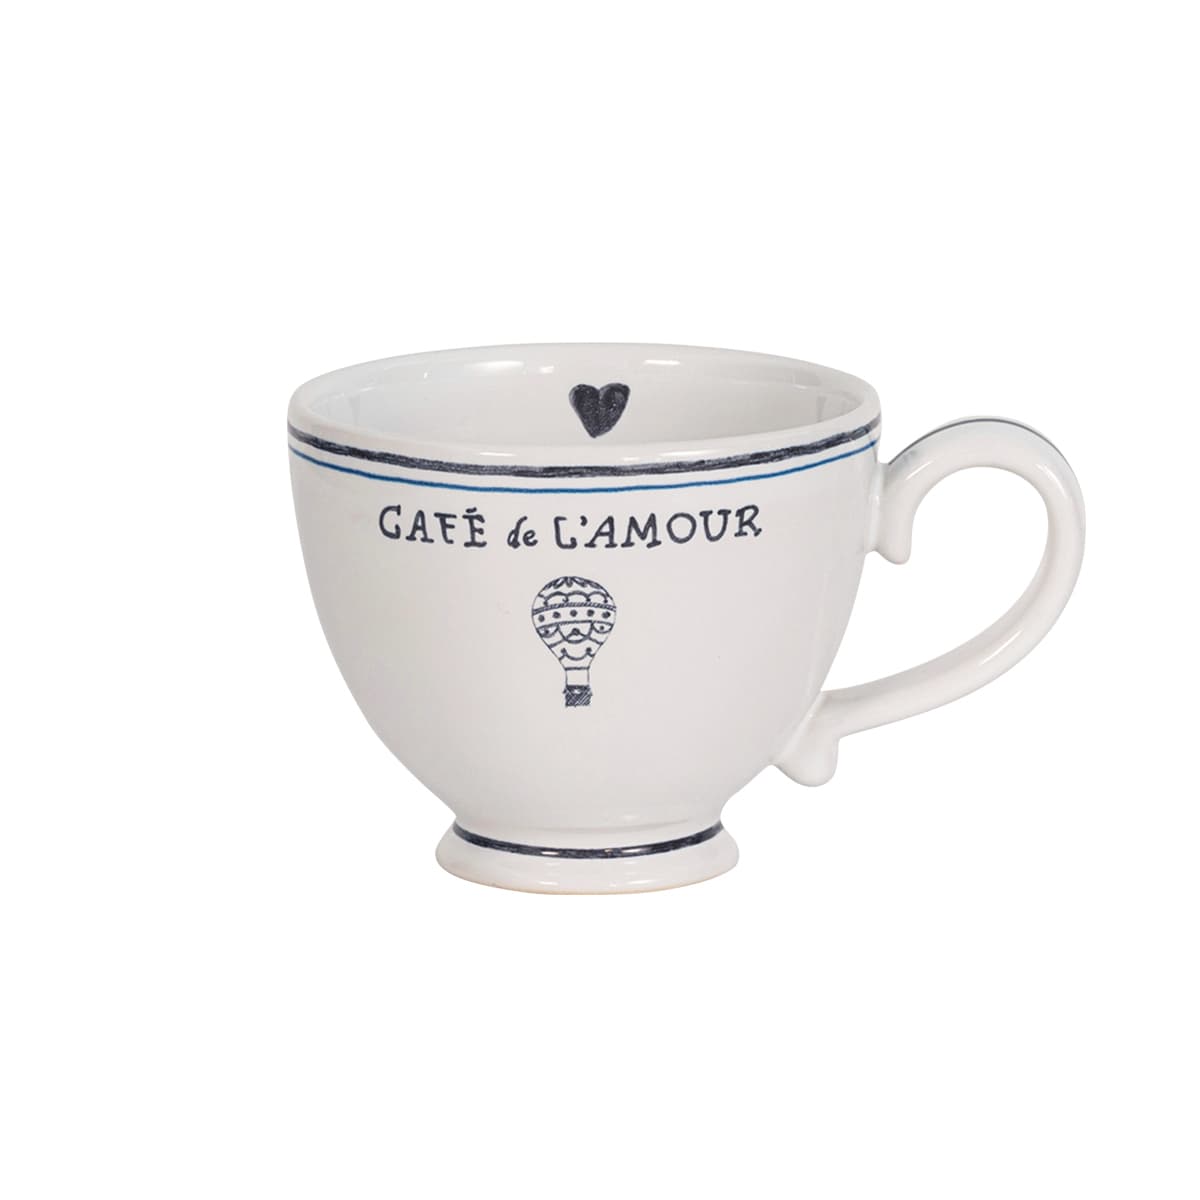 Greet every sunrise with this copious “breakfast cup” that is trimmed in chic black and blue details and is abundantly sized to fuel your daily adventures with coffee, tea, or a decadent chocolat chaud. A petite heart flies alongside our hand sketched Cafe de L’Amour banner and hot air balloon, reminding us to share love wherever the day may take us. 